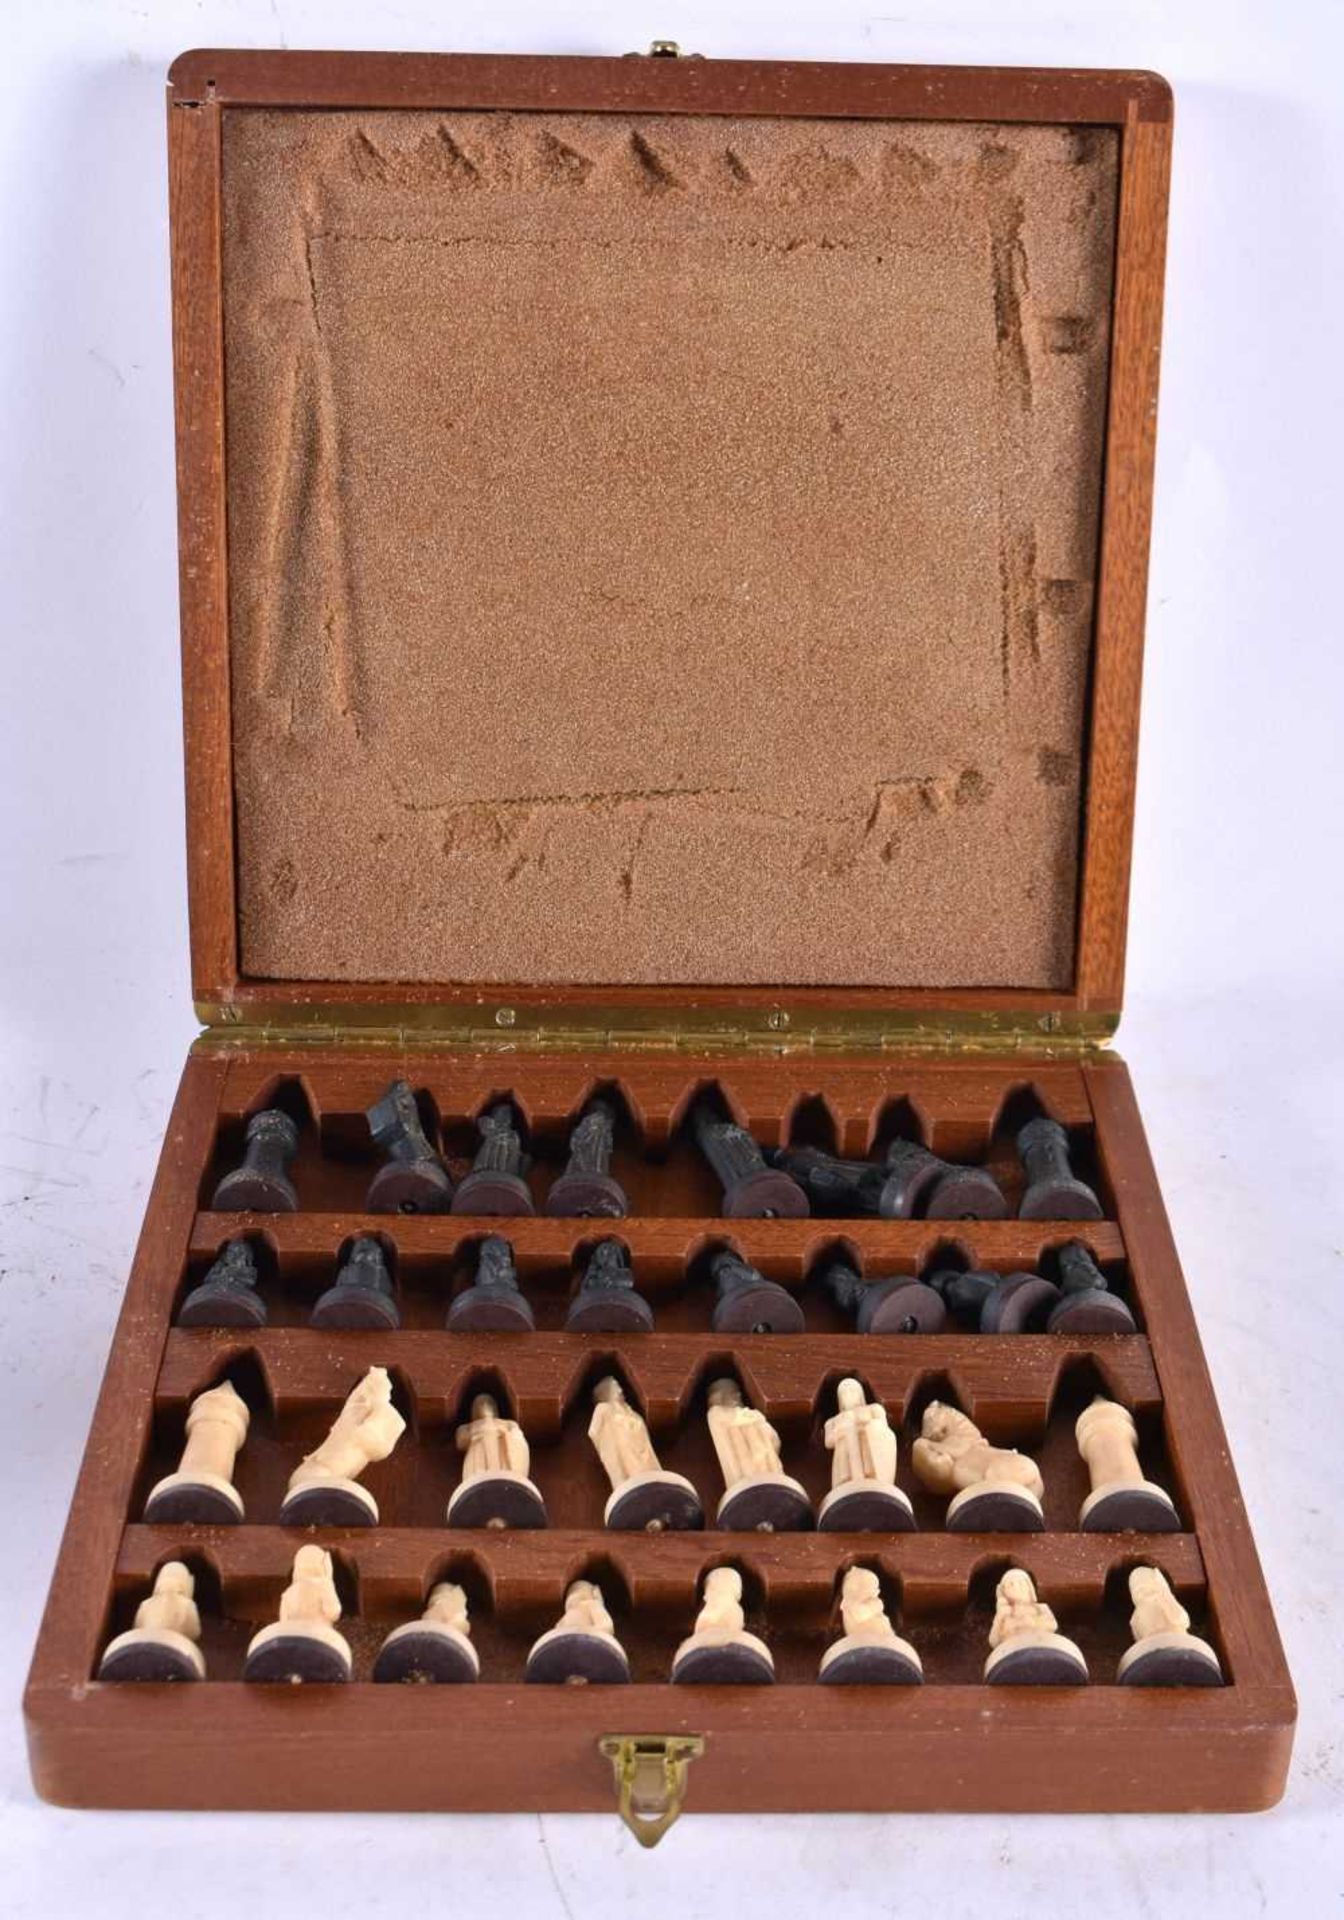 A BOXED CHESS SET. Board 20 cm square closed. - Image 2 of 3